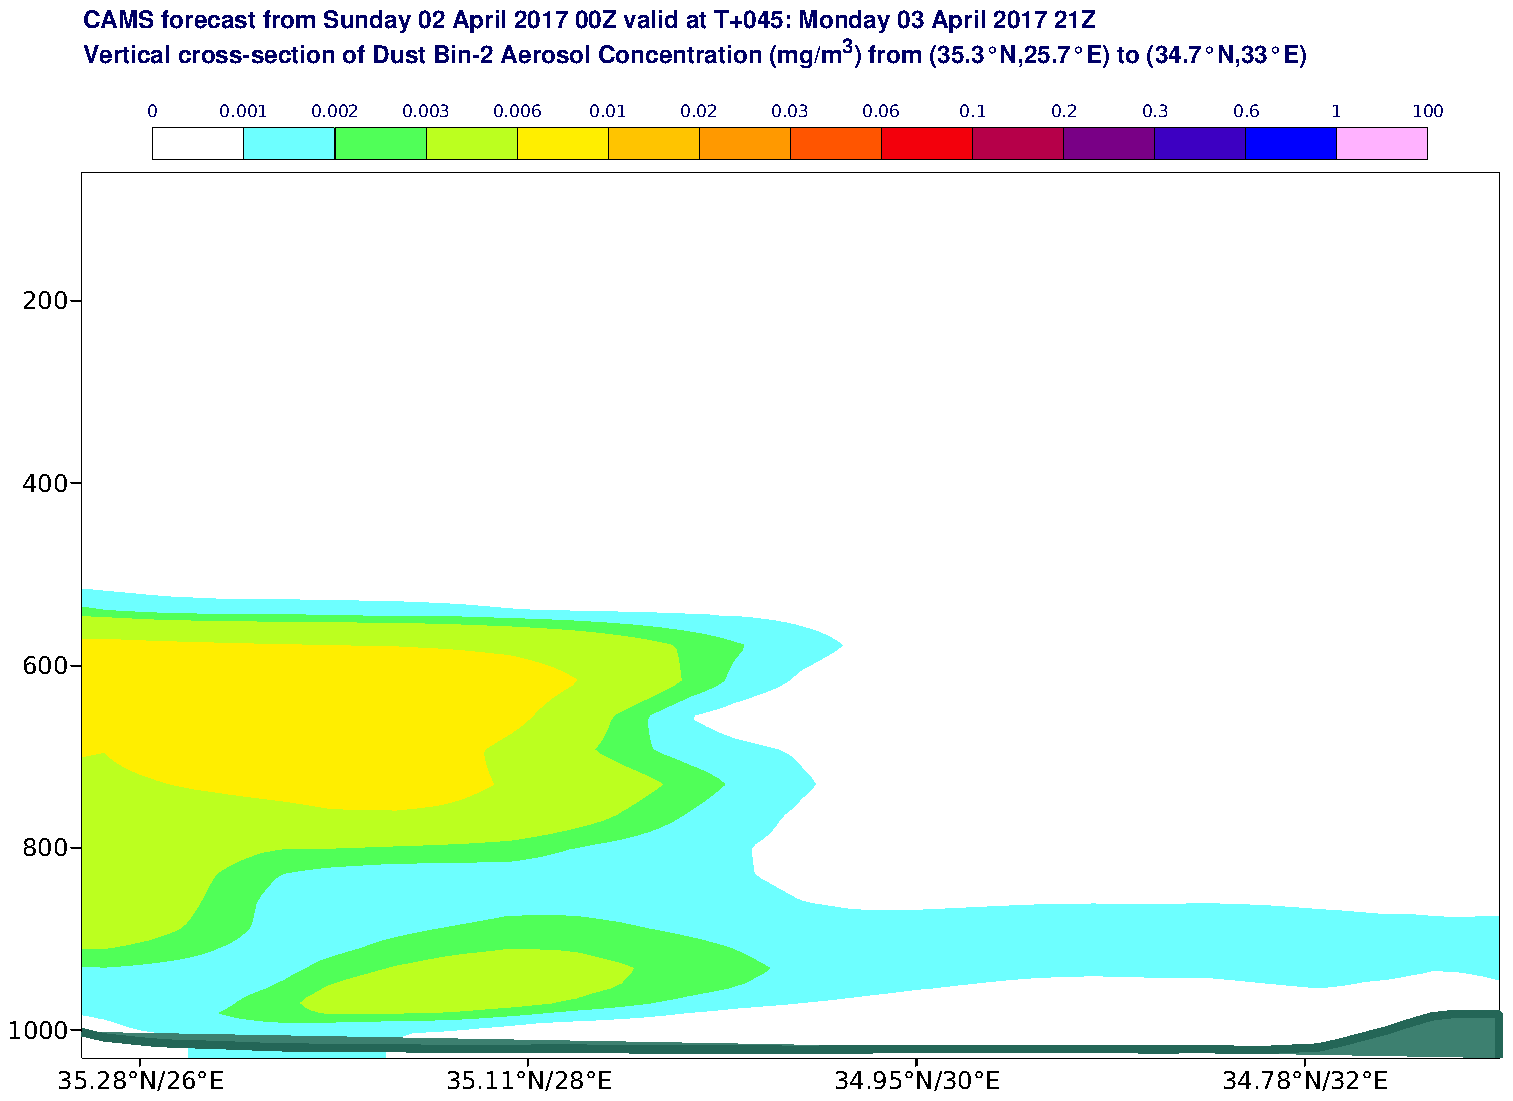 Vertical cross-section of Dust Bin-2 Aerosol Concentration (mg/m3) valid at T45 - 2017-04-03 21:00